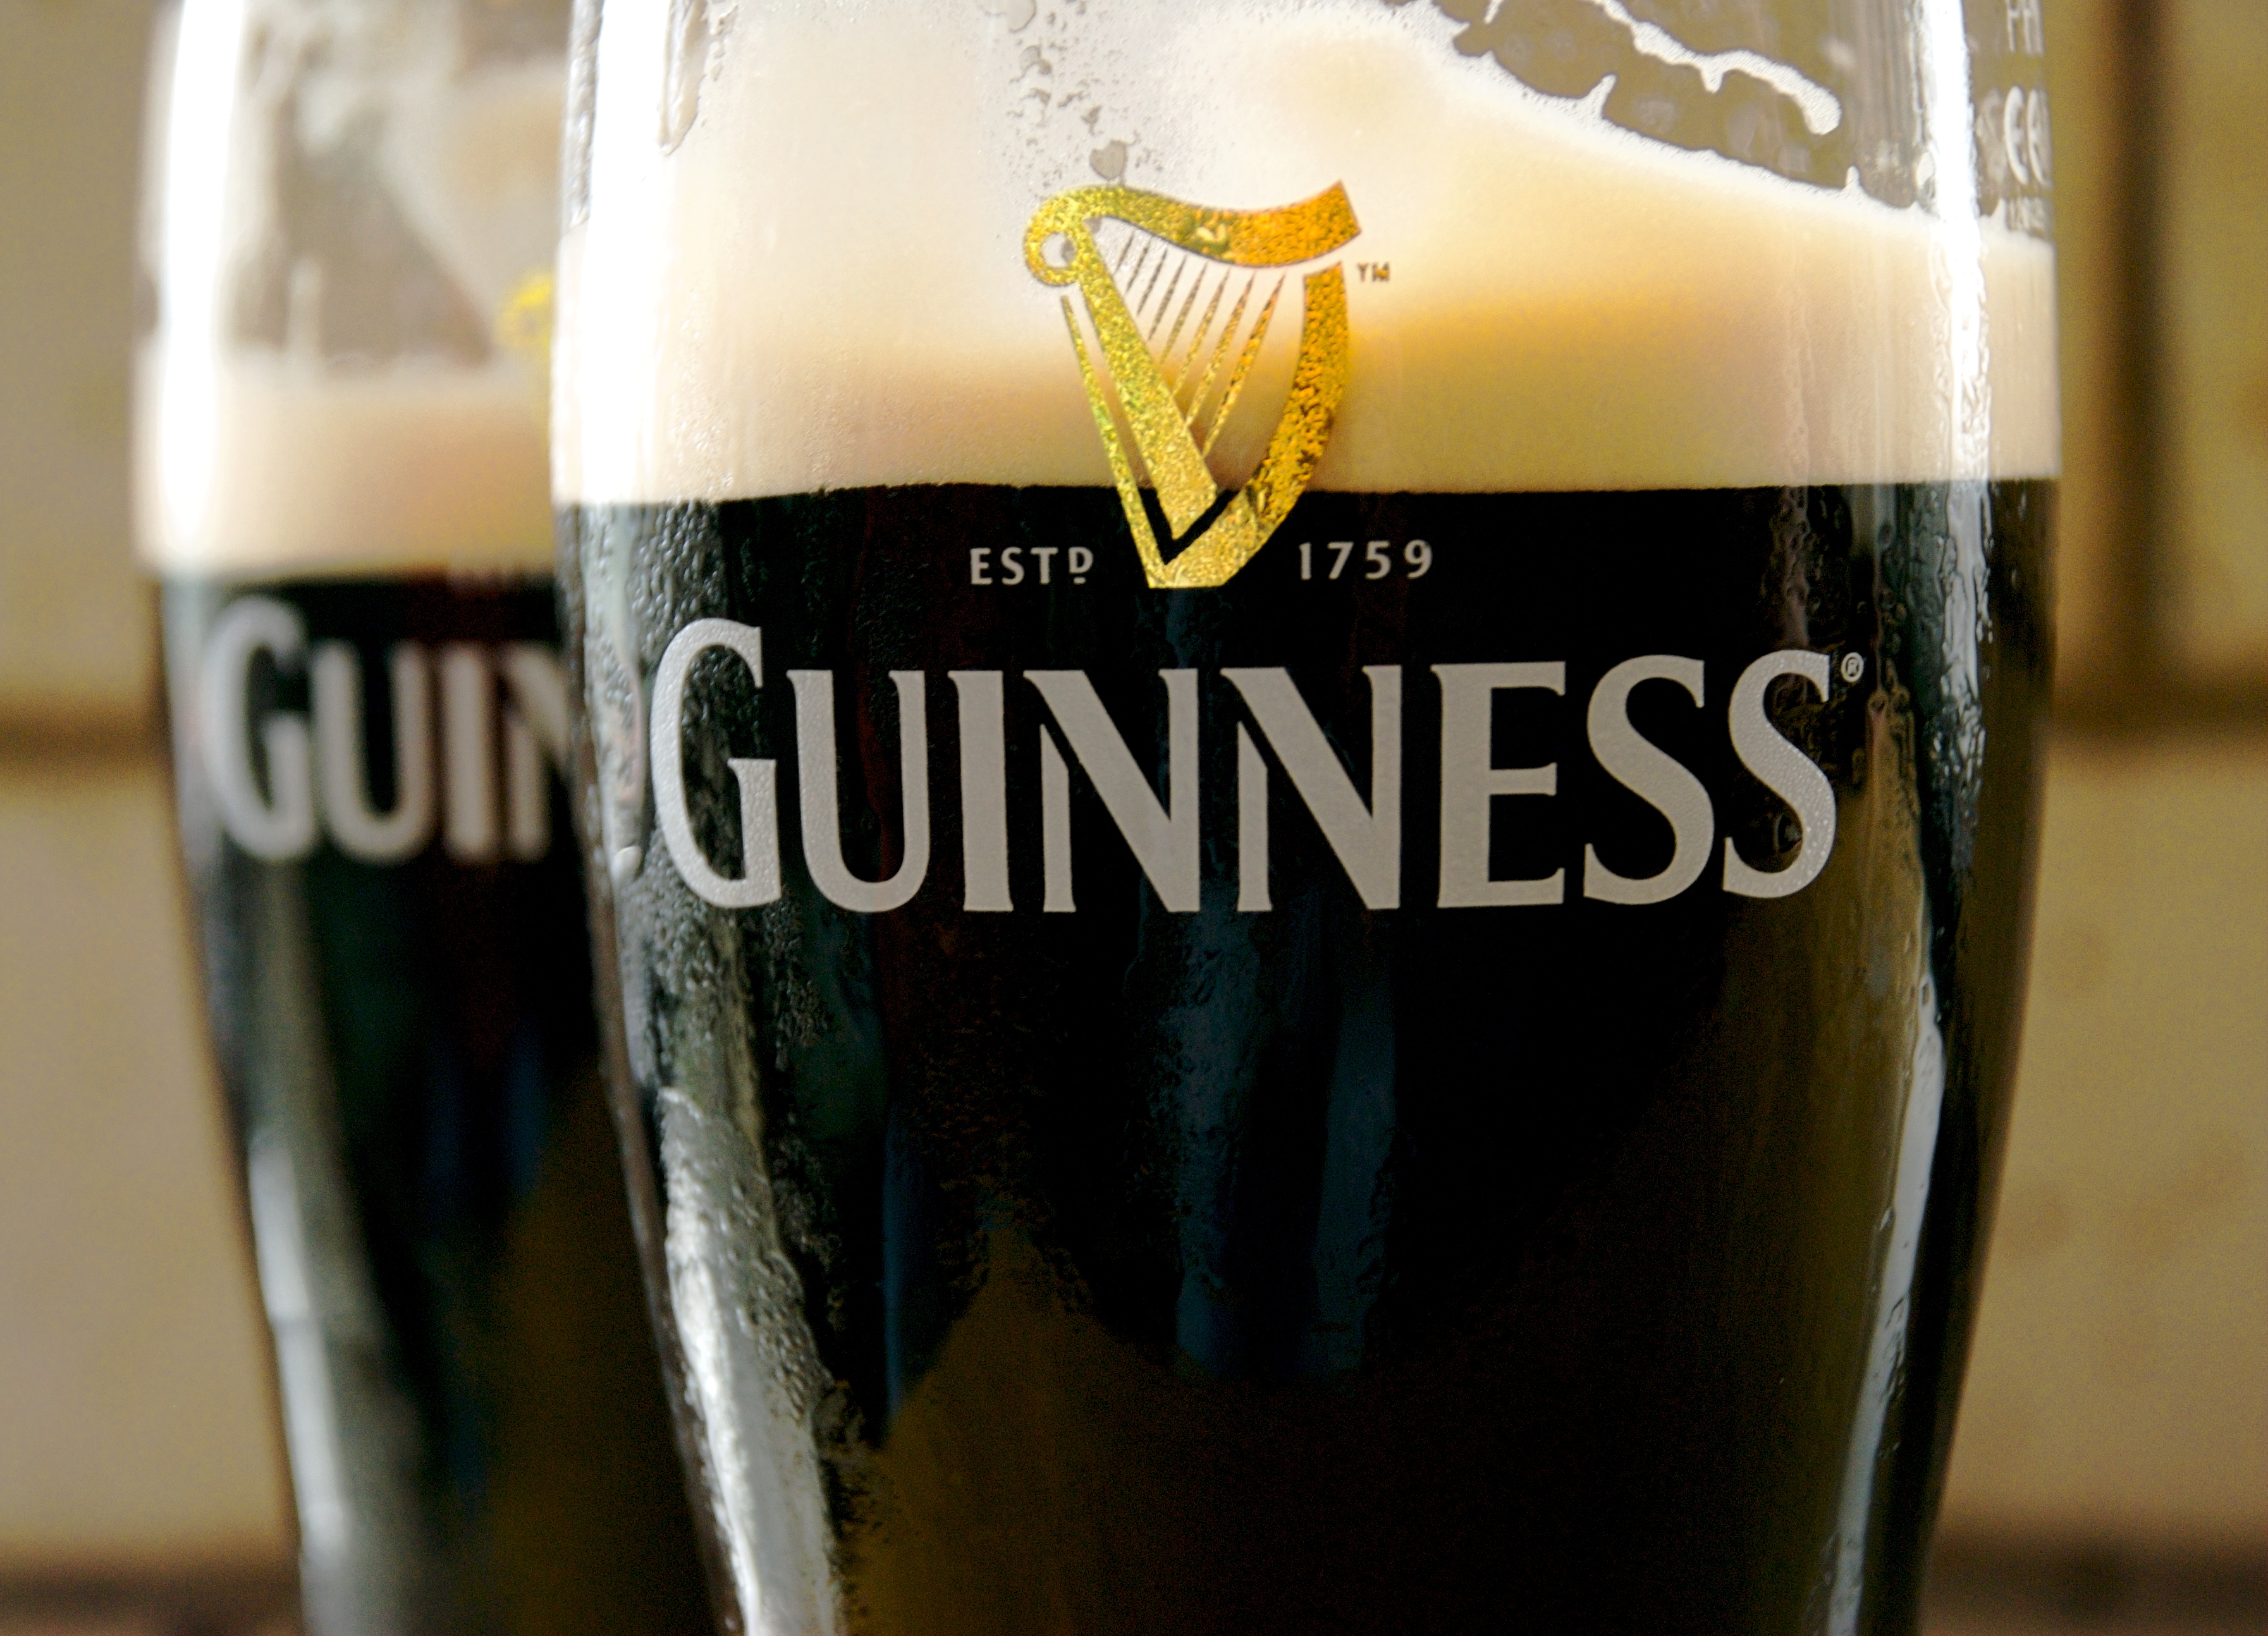 products, guinness 2160p